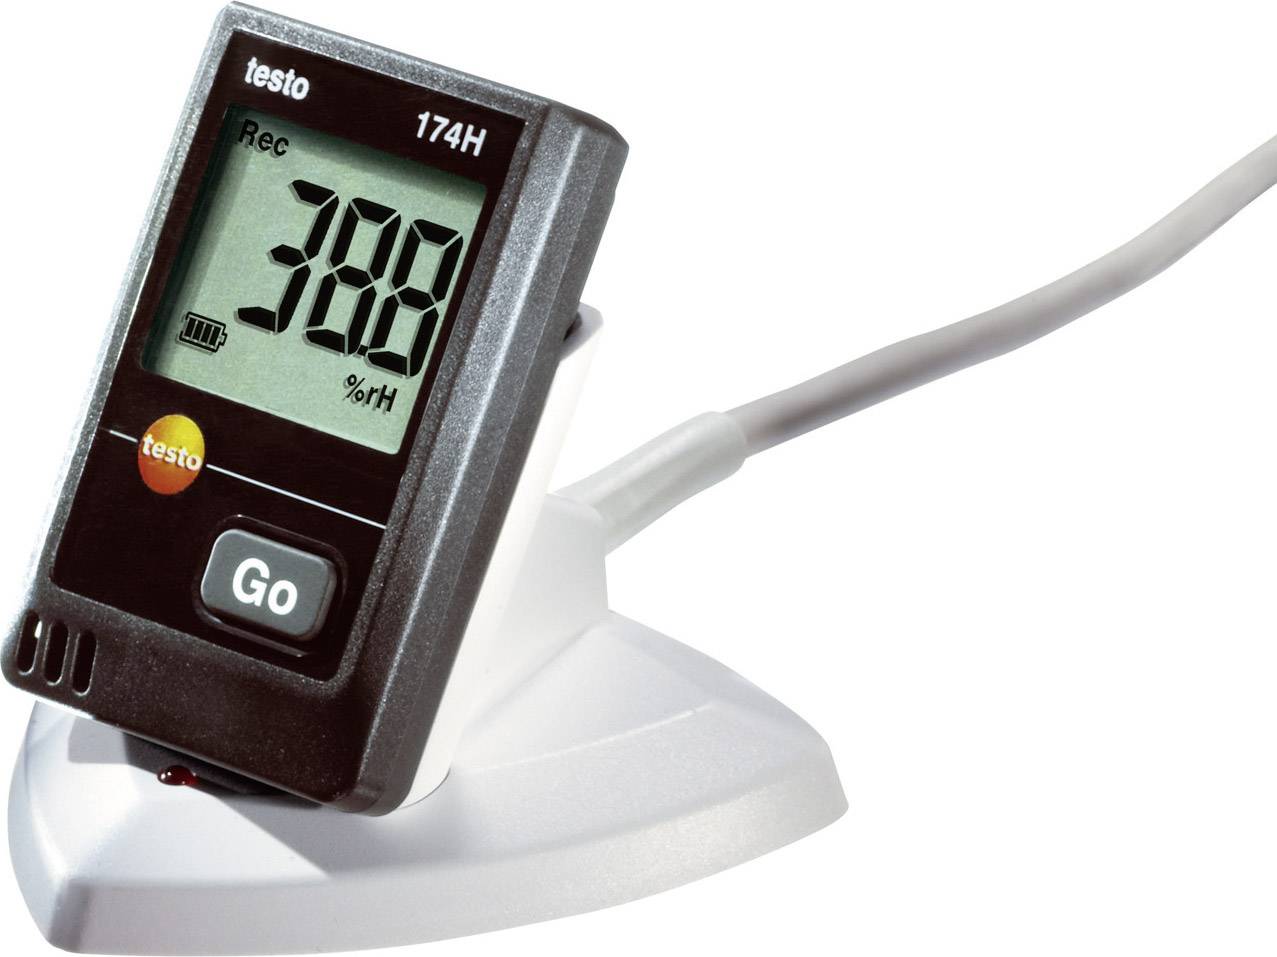 Testo 174T Data Logger Temp Temperature Meter With USB Cable 0572 0561 